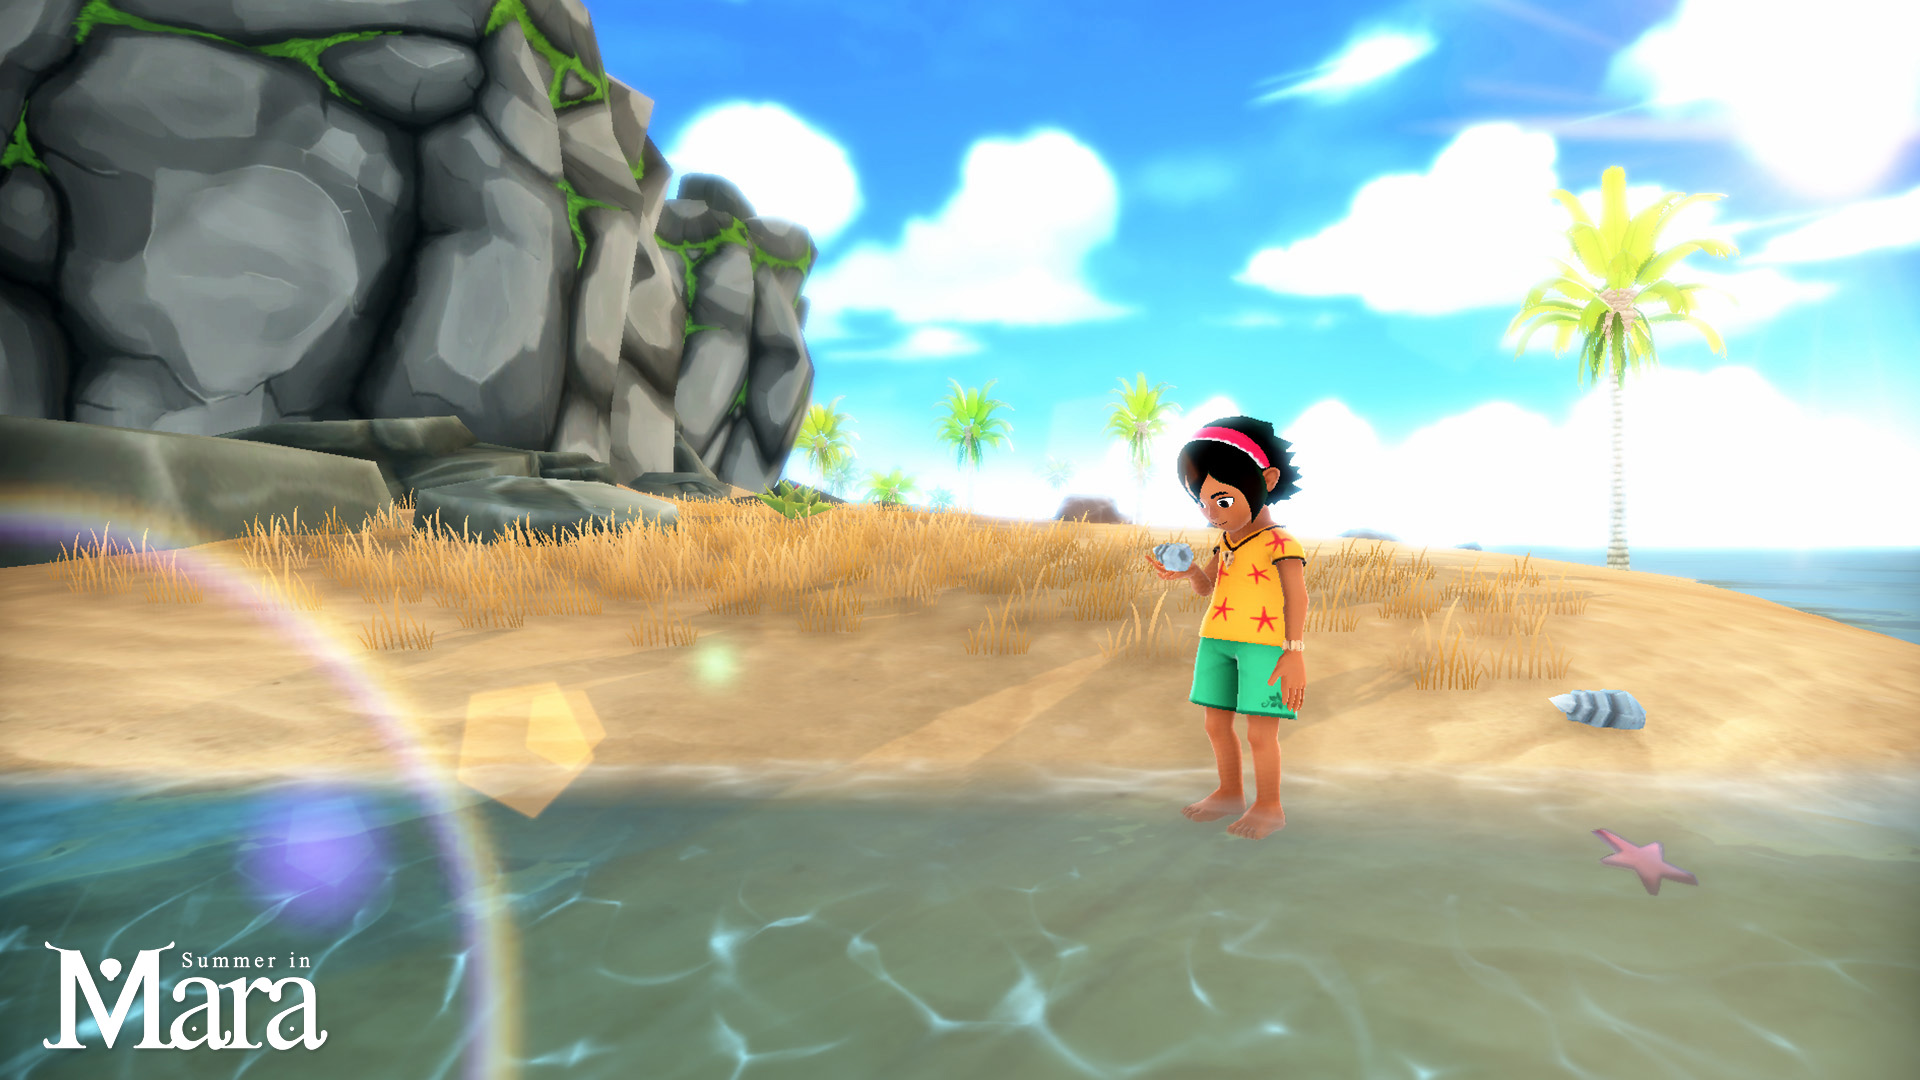 Summer Days System Requirements - Can I Run It? - PCGameBenchmark